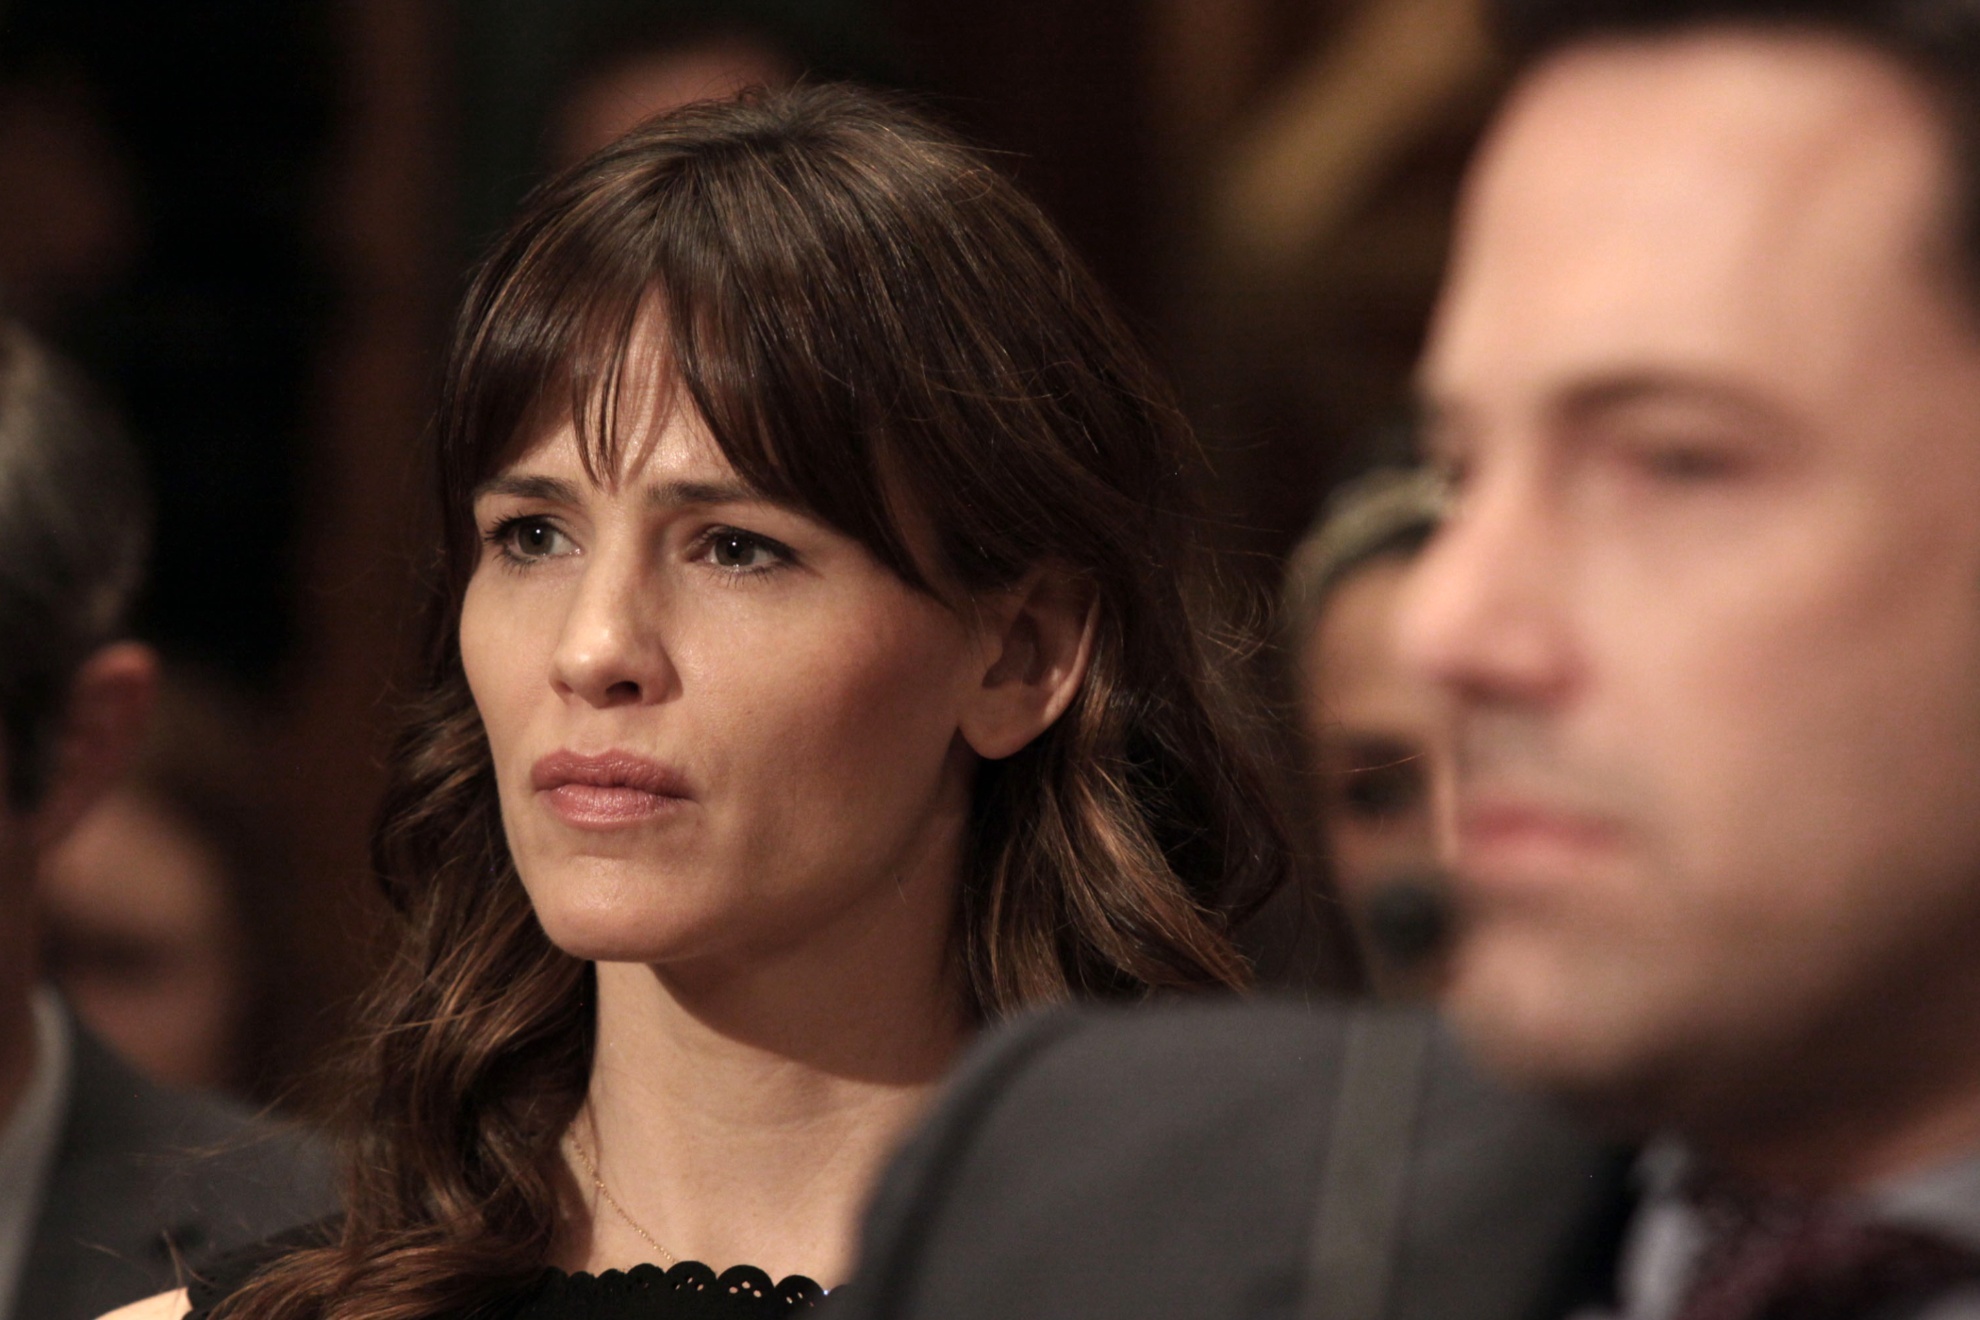 Actress Jennifer Garner listens to testimony on Capitol Hill in Washington, Thursday, March 26, 2015, during a Senate State, Foreign Operations, and Related Programs subcommittee hearing on diplomacy, development and national security, where her husband, Ben Affleck, right, testified. (AP Photo/Lauren Victoria Burke)